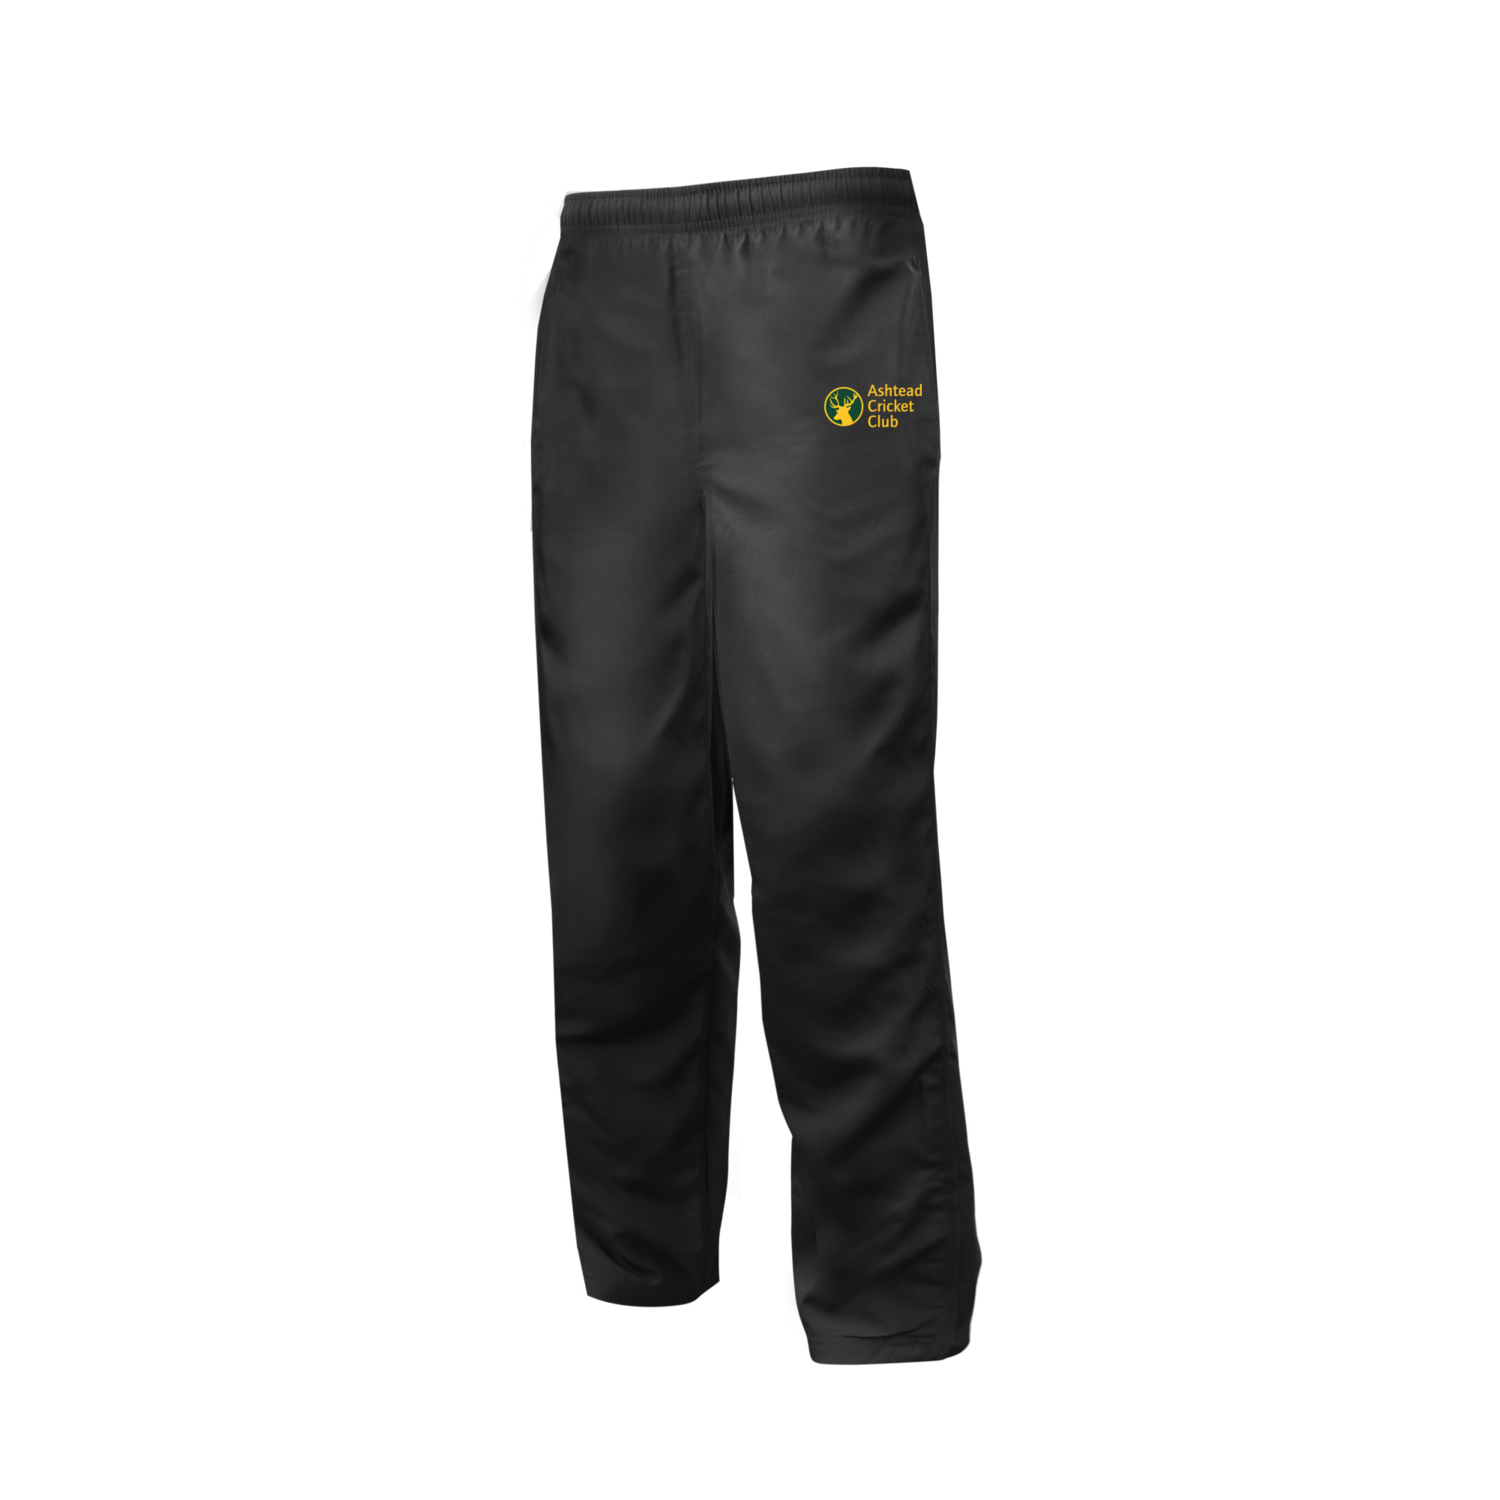 Training trousers